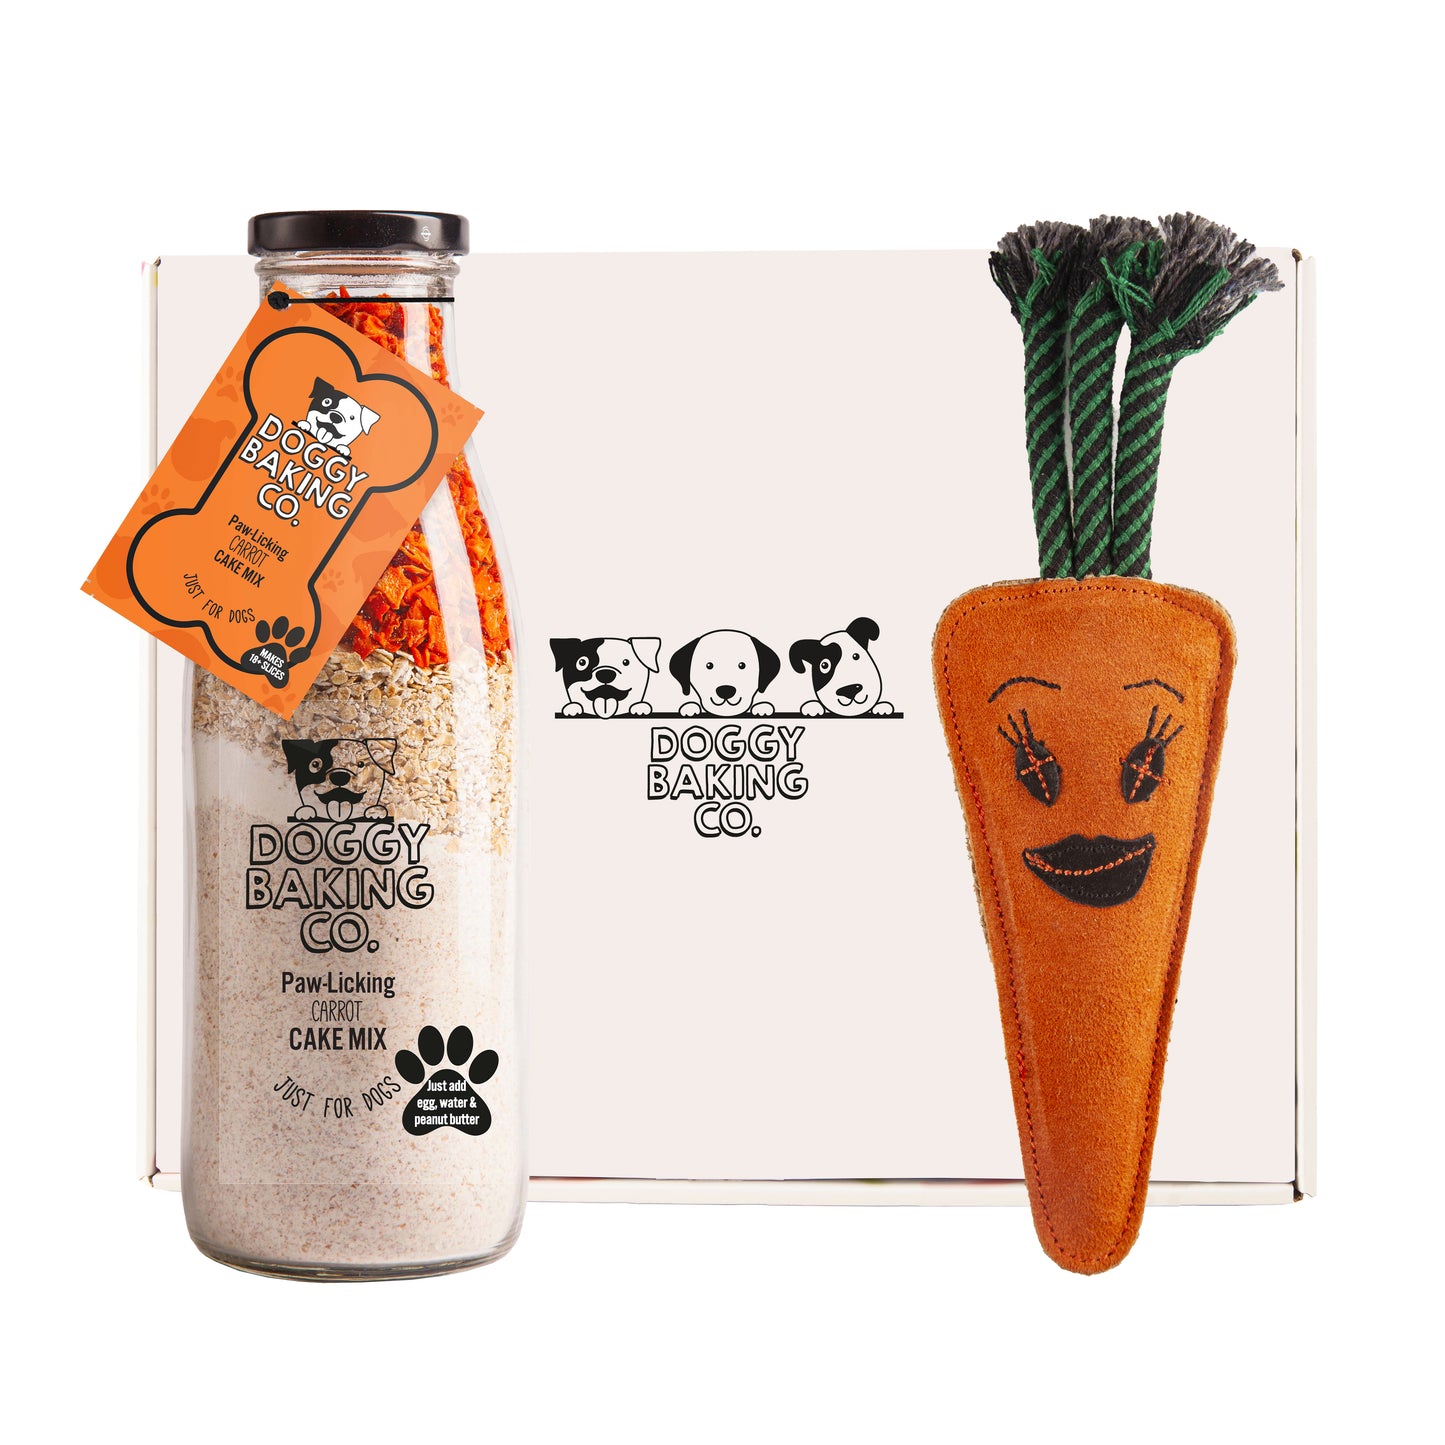 Carrot Cake Mix & Carrot Toy Gift box - Doggy Baking Co by The Bottled Baking Co